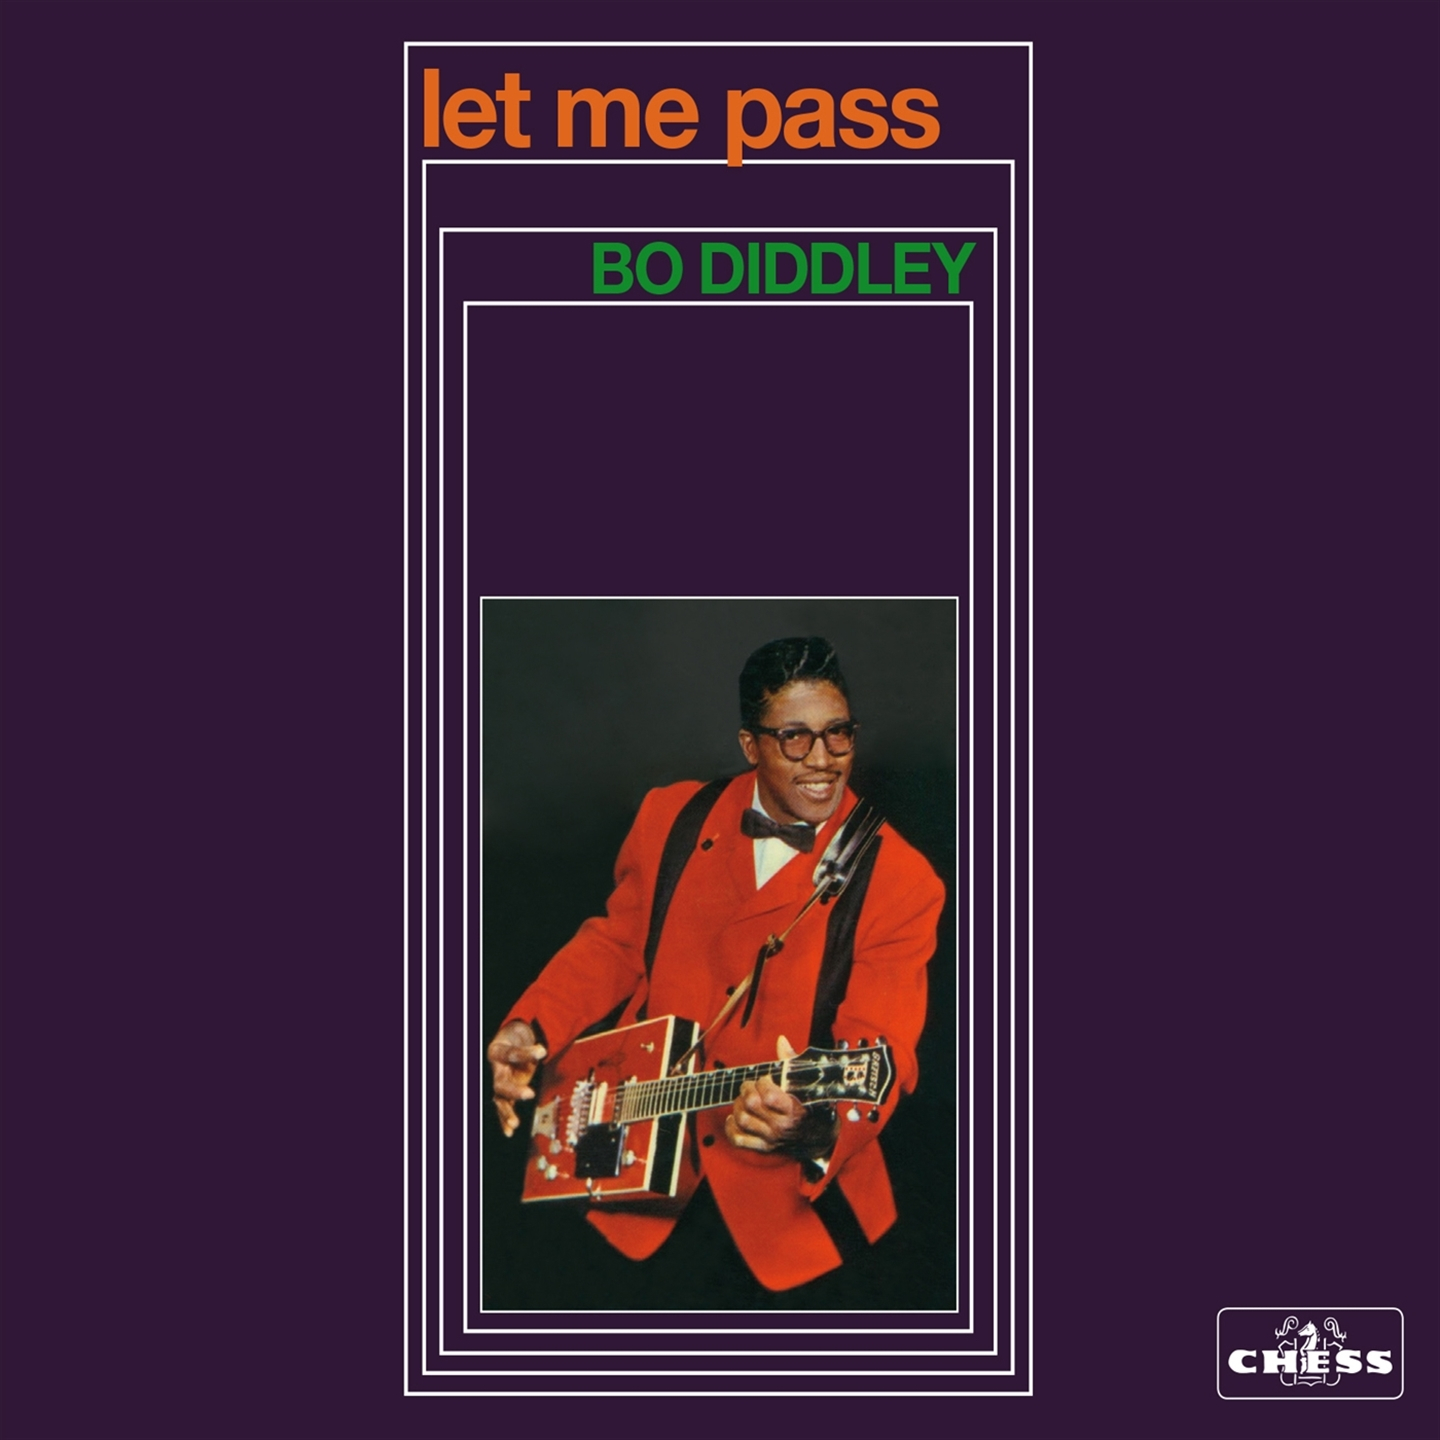 LET ME PASS